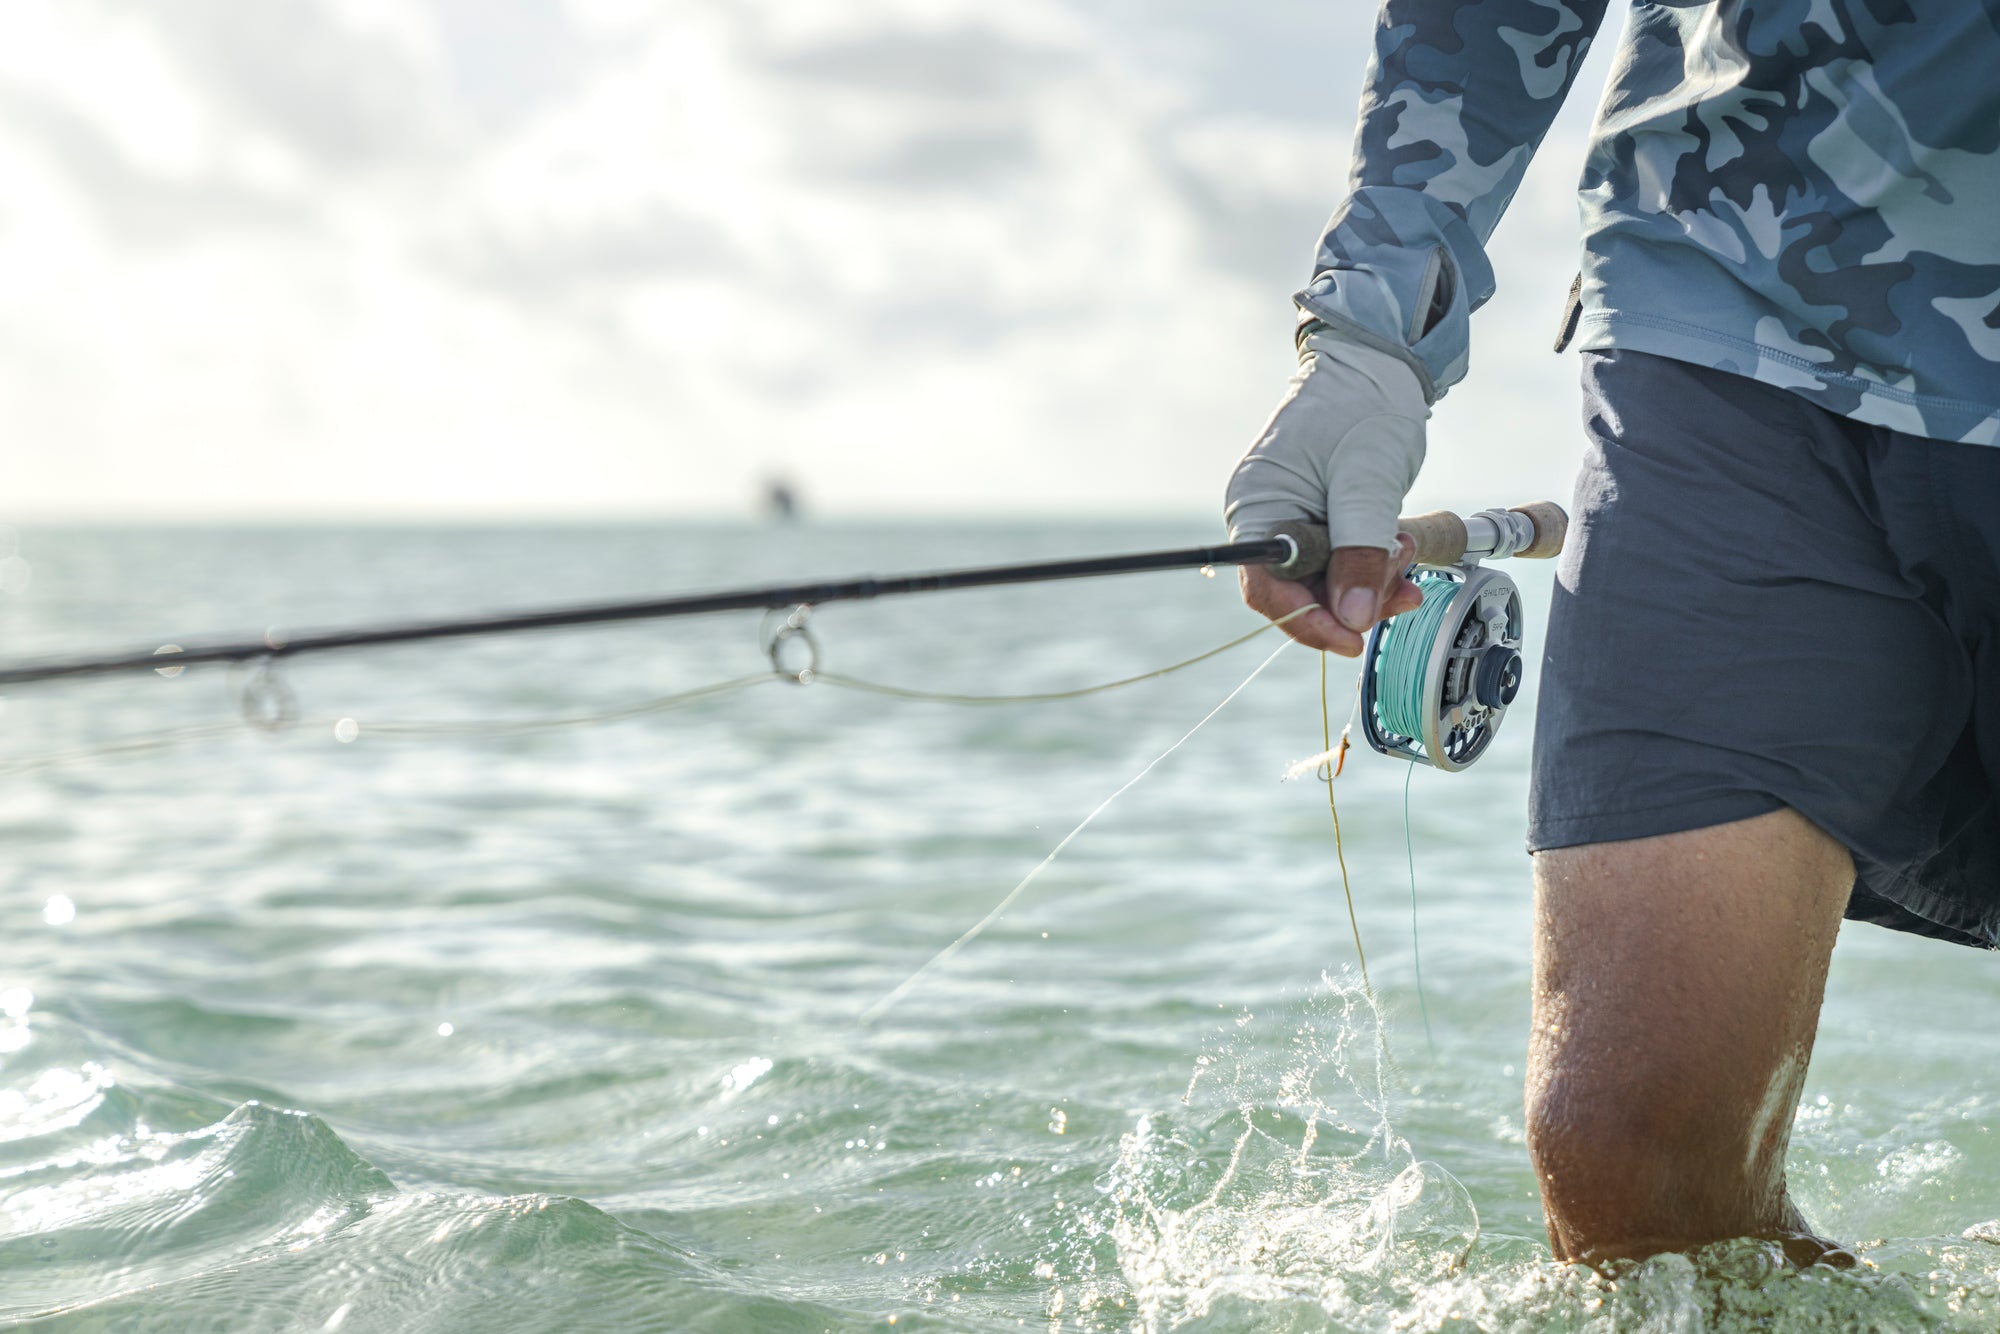 Saltwater Float Fishing In The Sea In South Africa Tips & Information